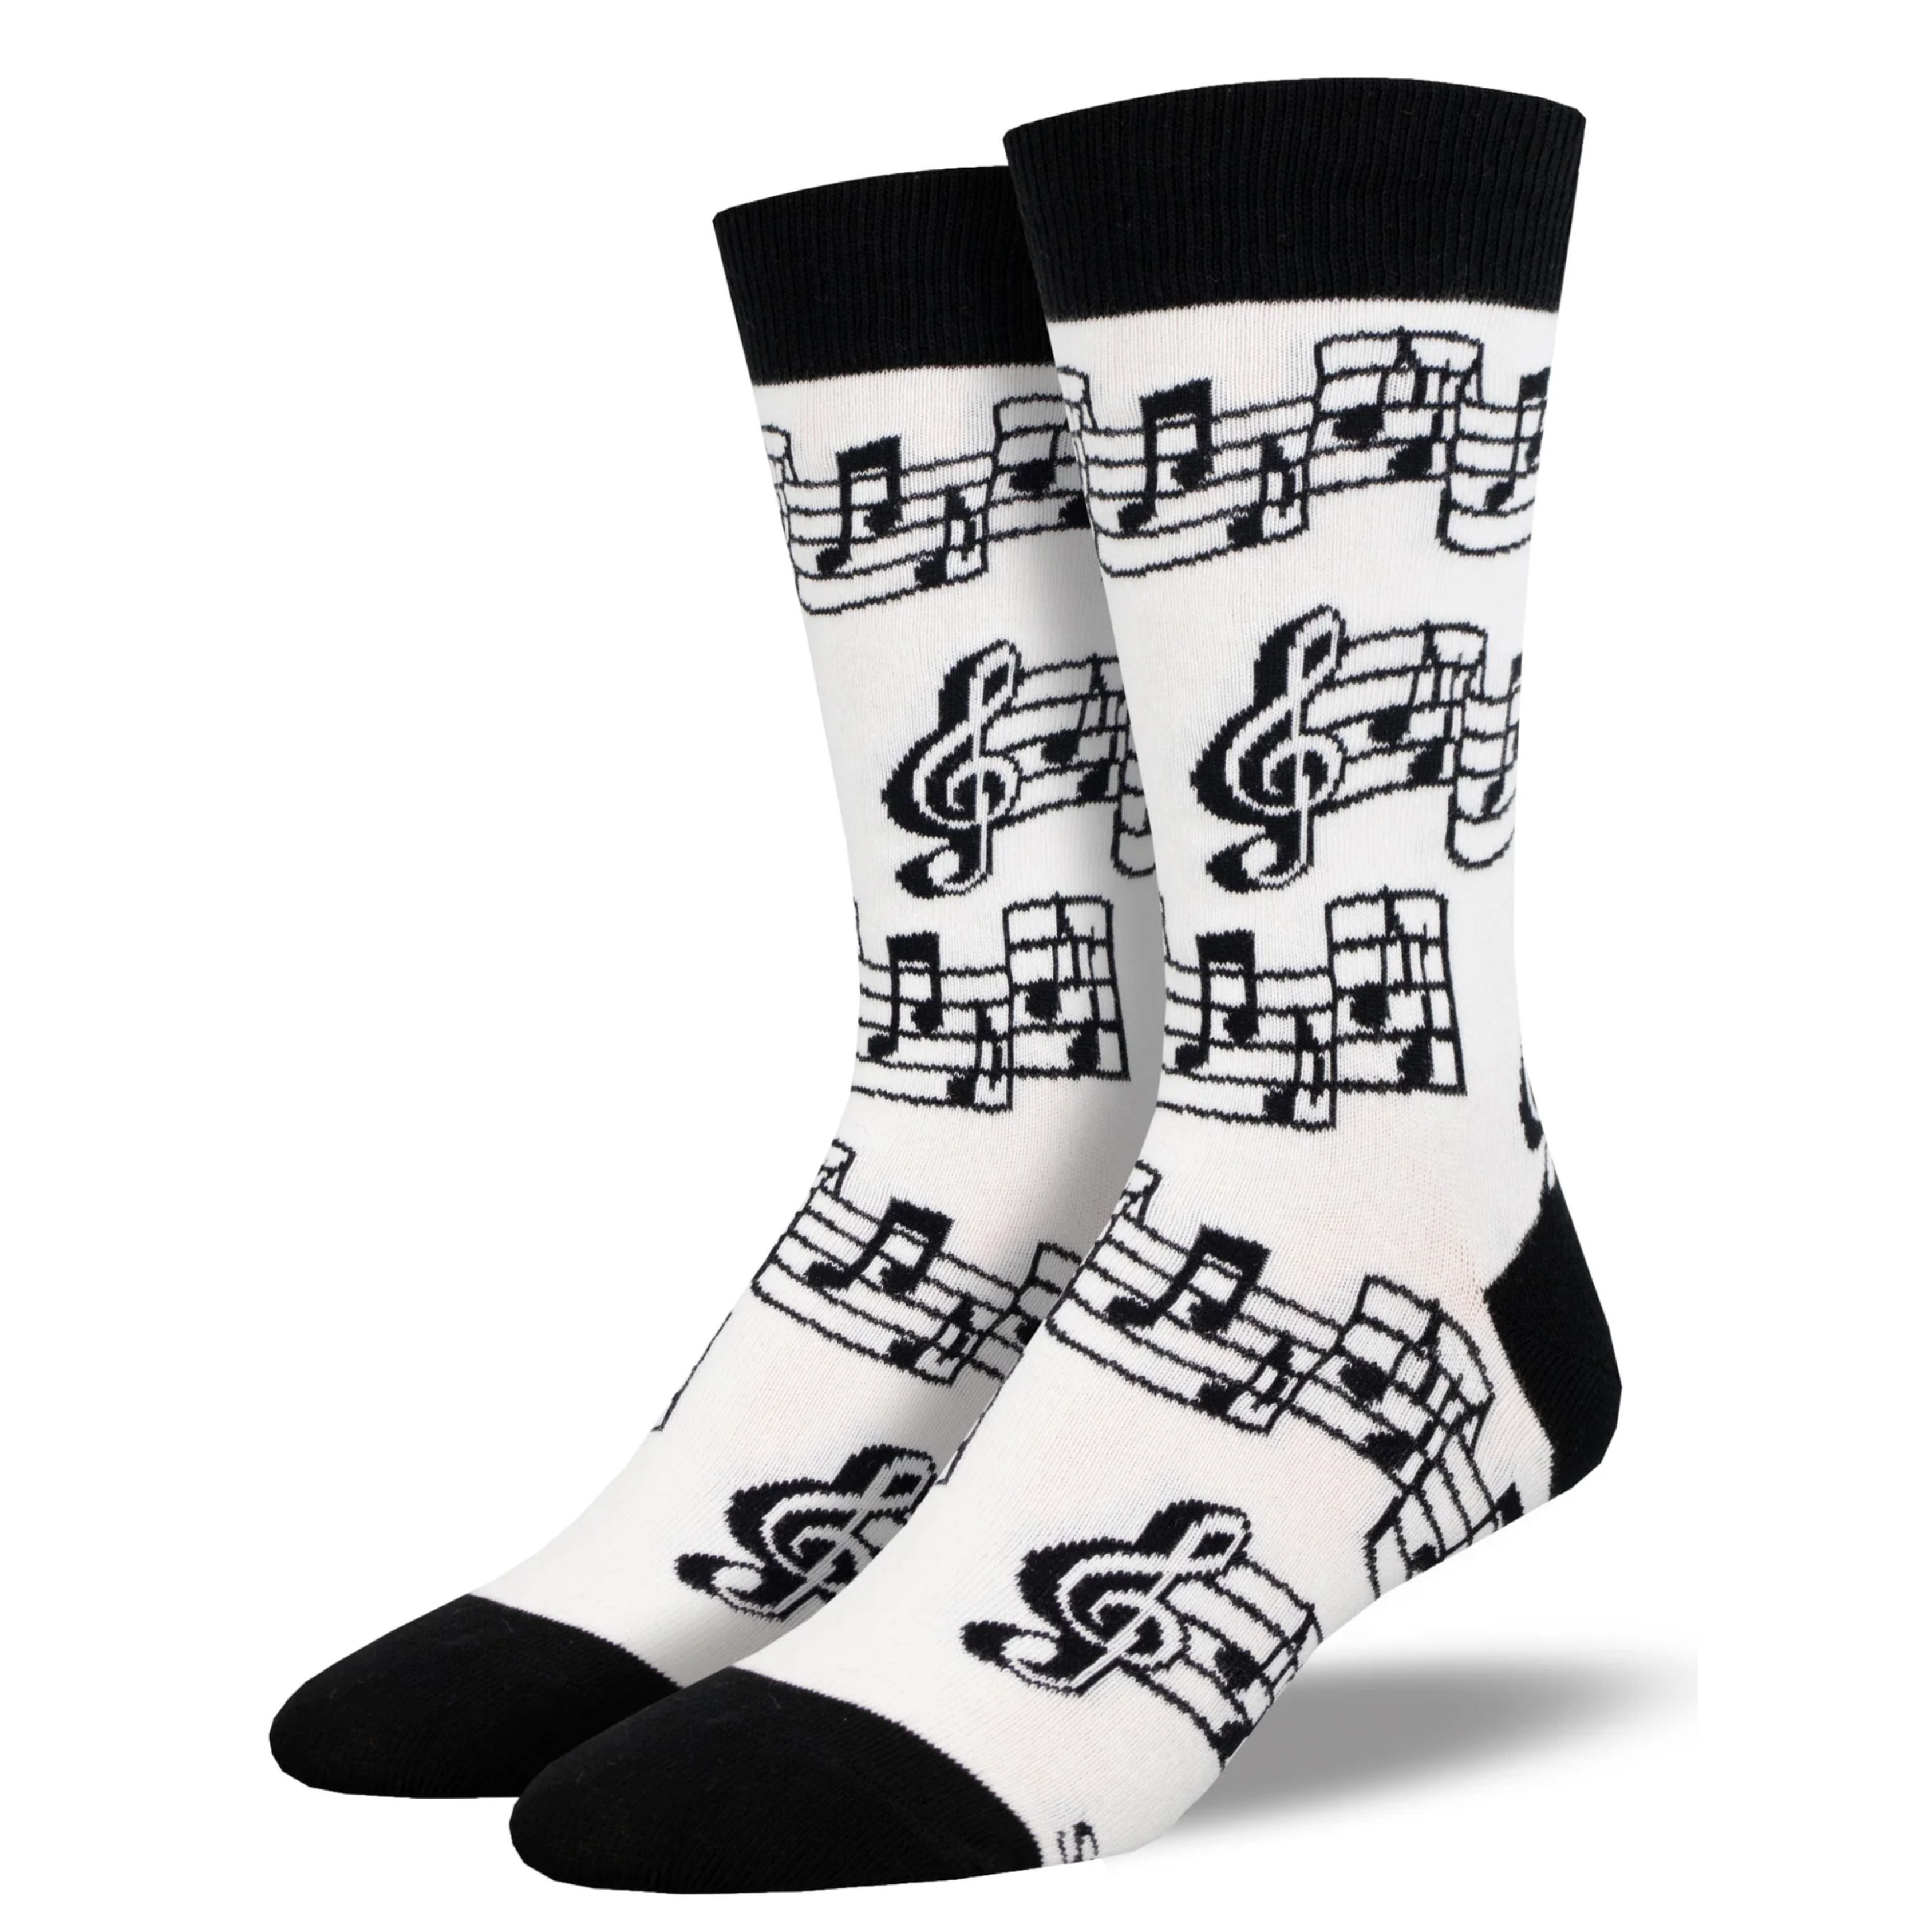 ThisWear Hard Rock Music Don't Keep Calm and Turn Up The Metal 1-Pair  Novelty Crew Socks